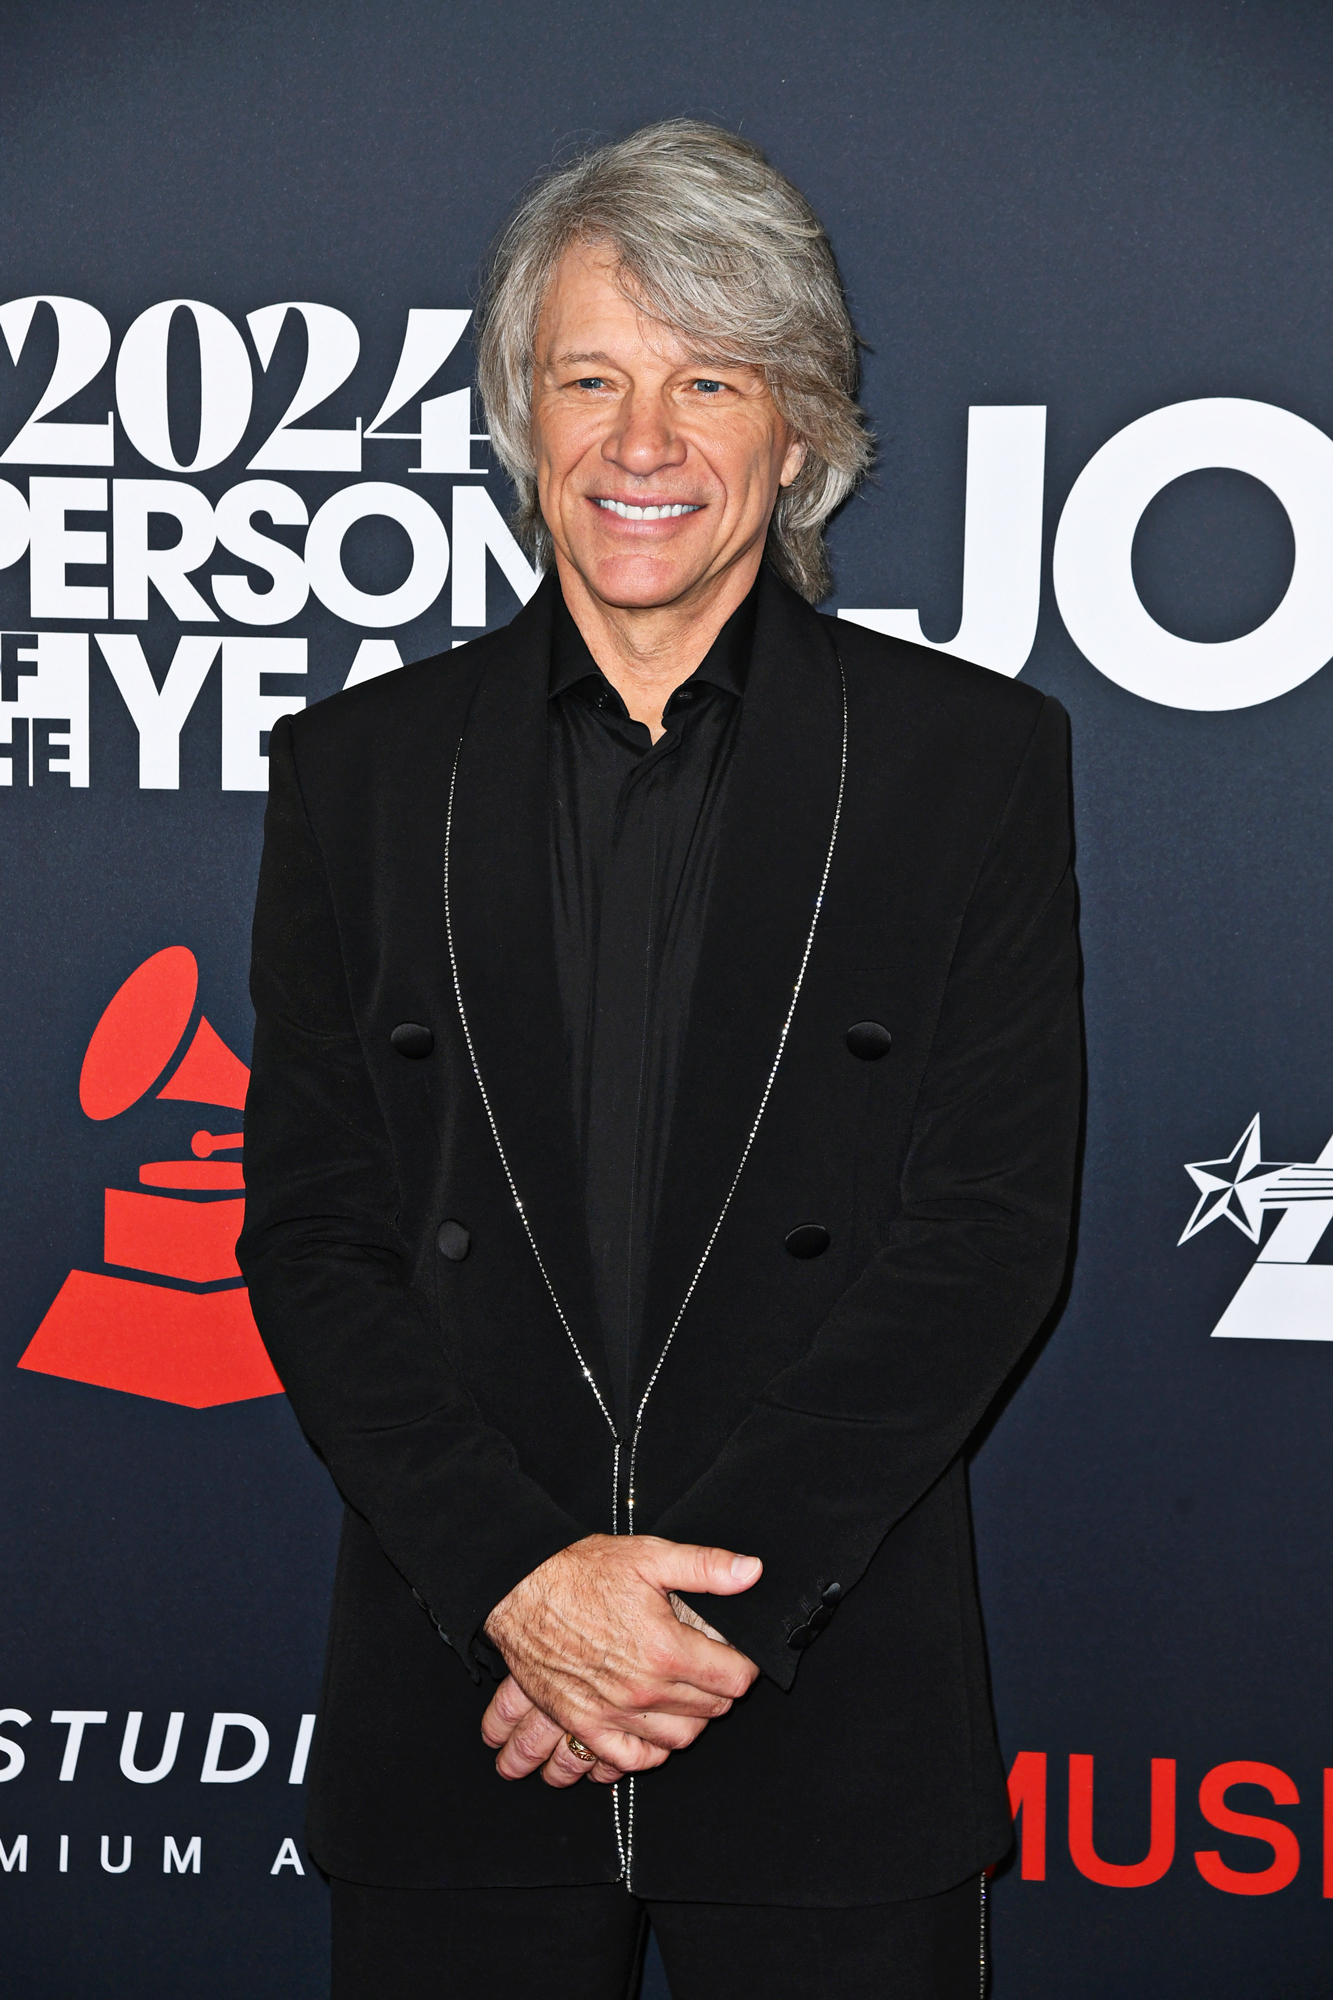 Jon Bon Jovi ‘Working Towards’ a Return as He Recovers from Vocal Surgery